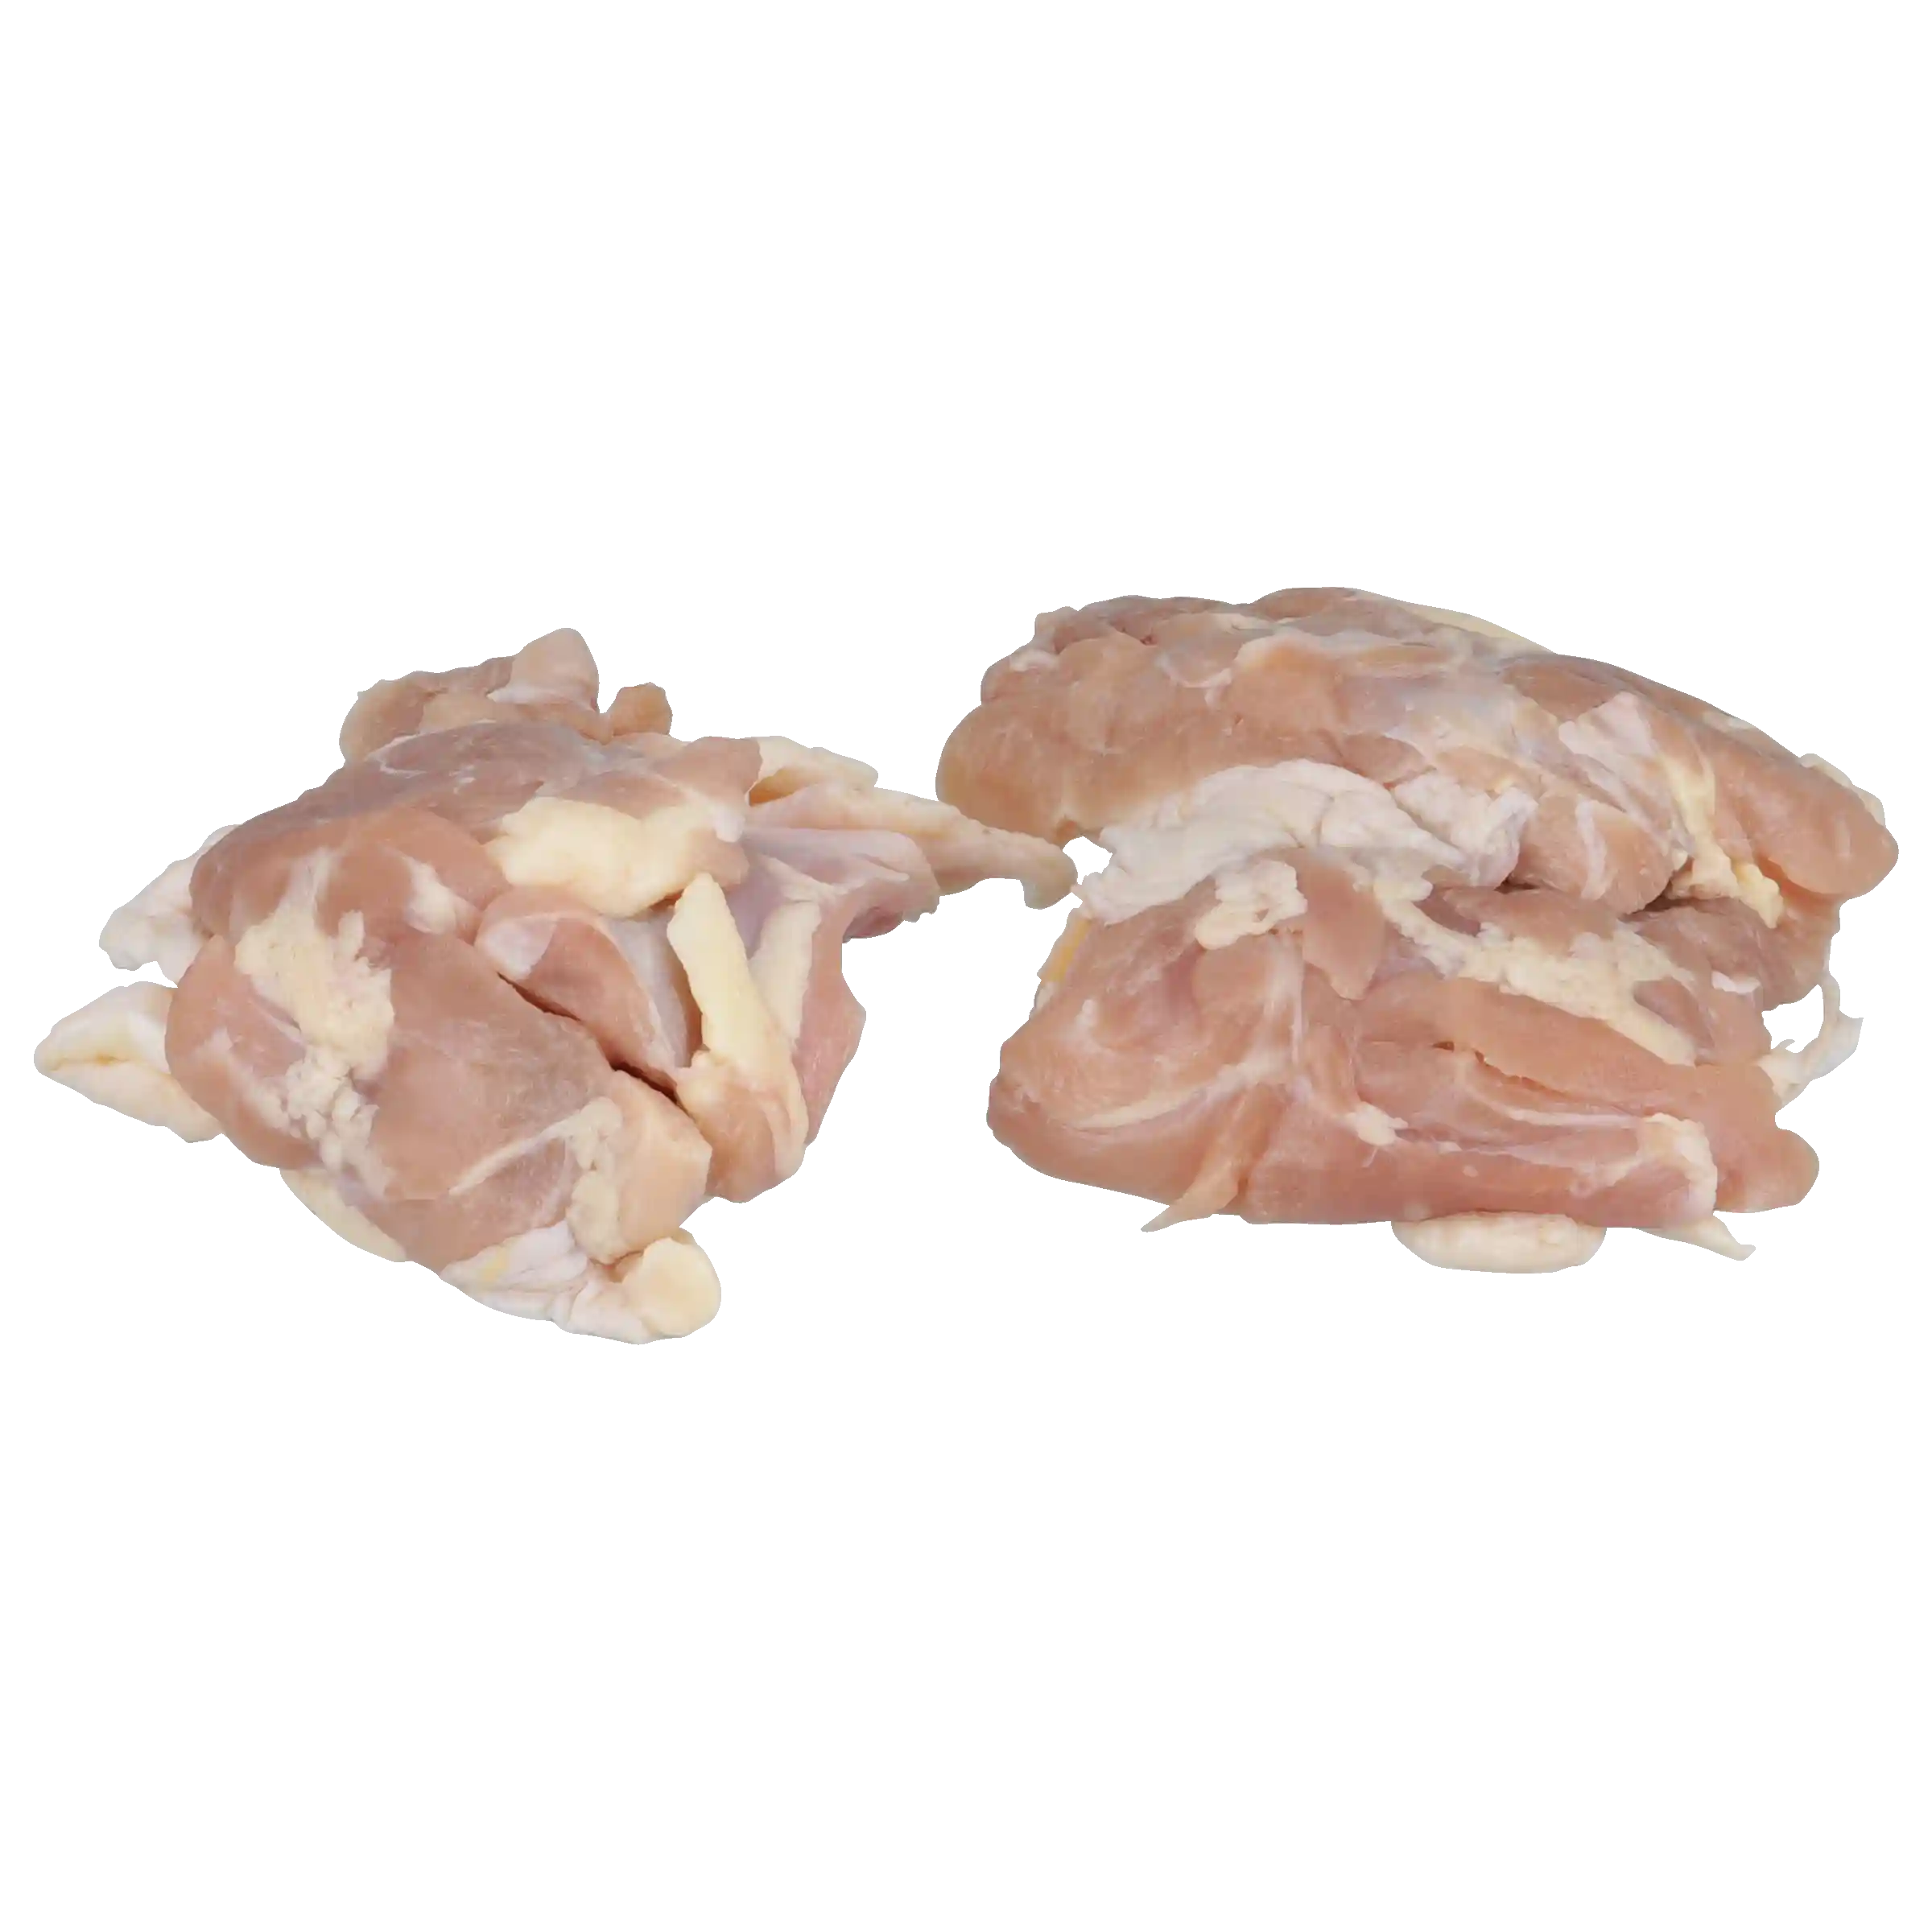 Tyson® All Natural* Uncooked Unbreaded Boneless Chicken Thighs, Skin On, 4.75 oz._image_11